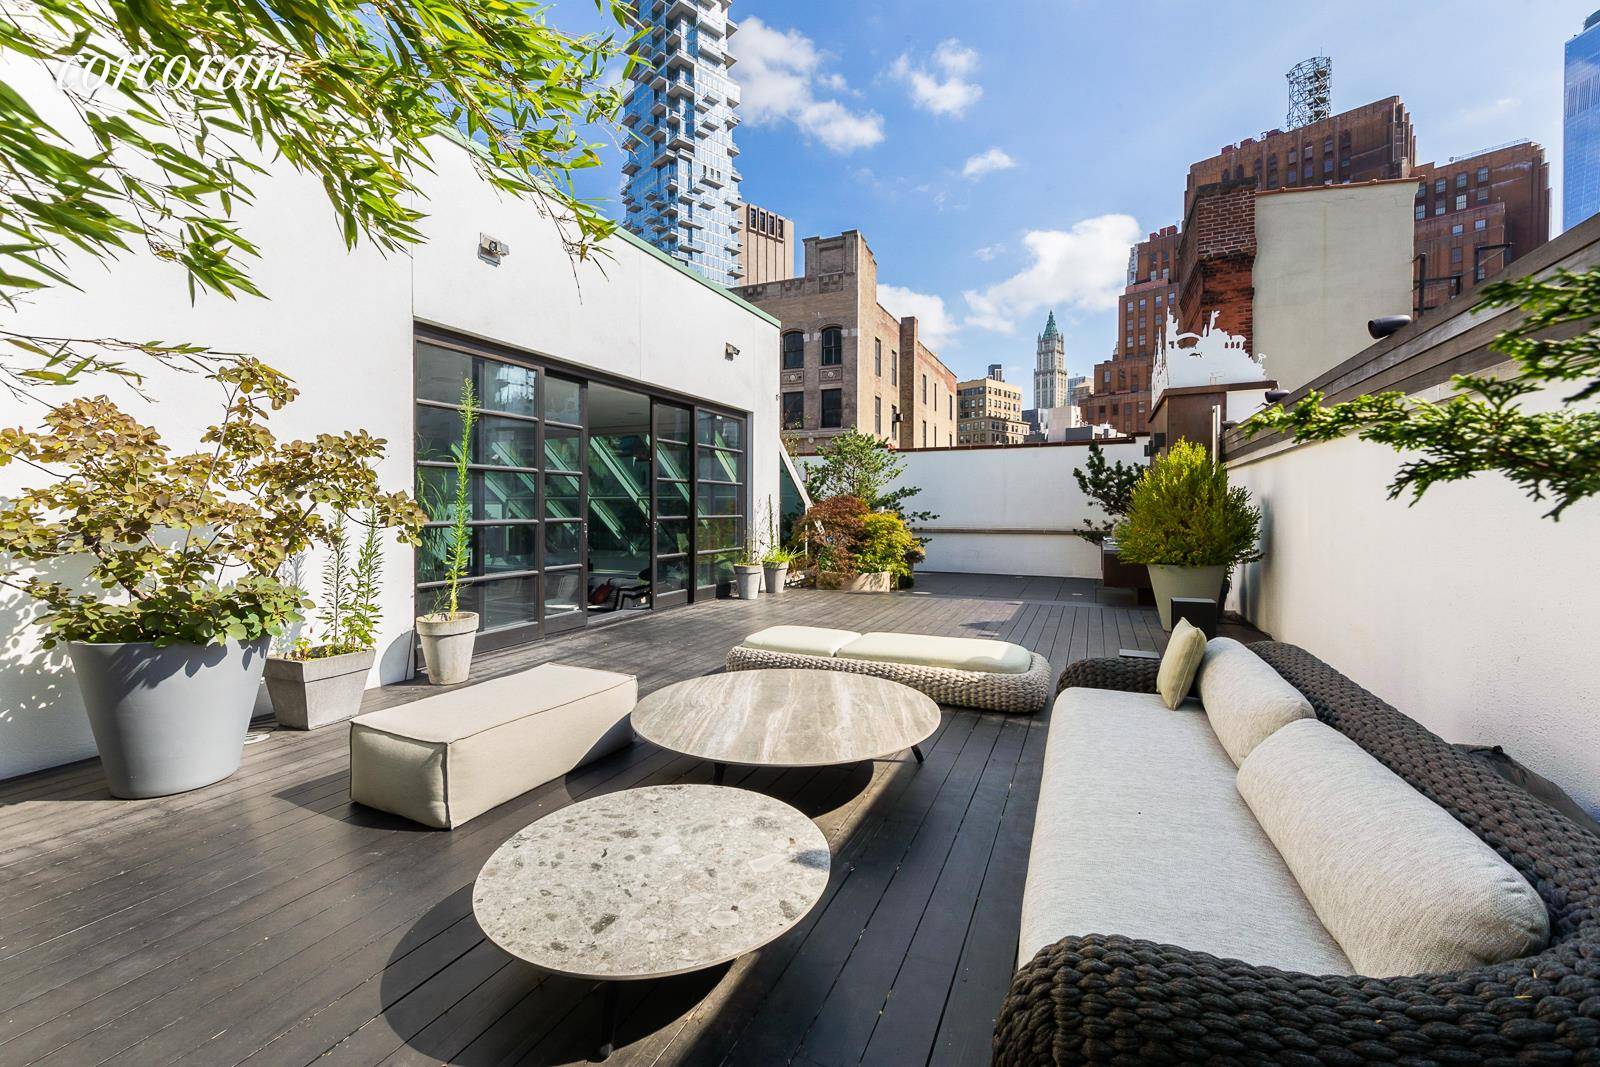 With 19th century architectural history and generous proportions, this 4 5 bedroom lofted duplex penthouse designed by renowned architect, Winka Dubbeldam, in the heart of one of TribecaA s most ...